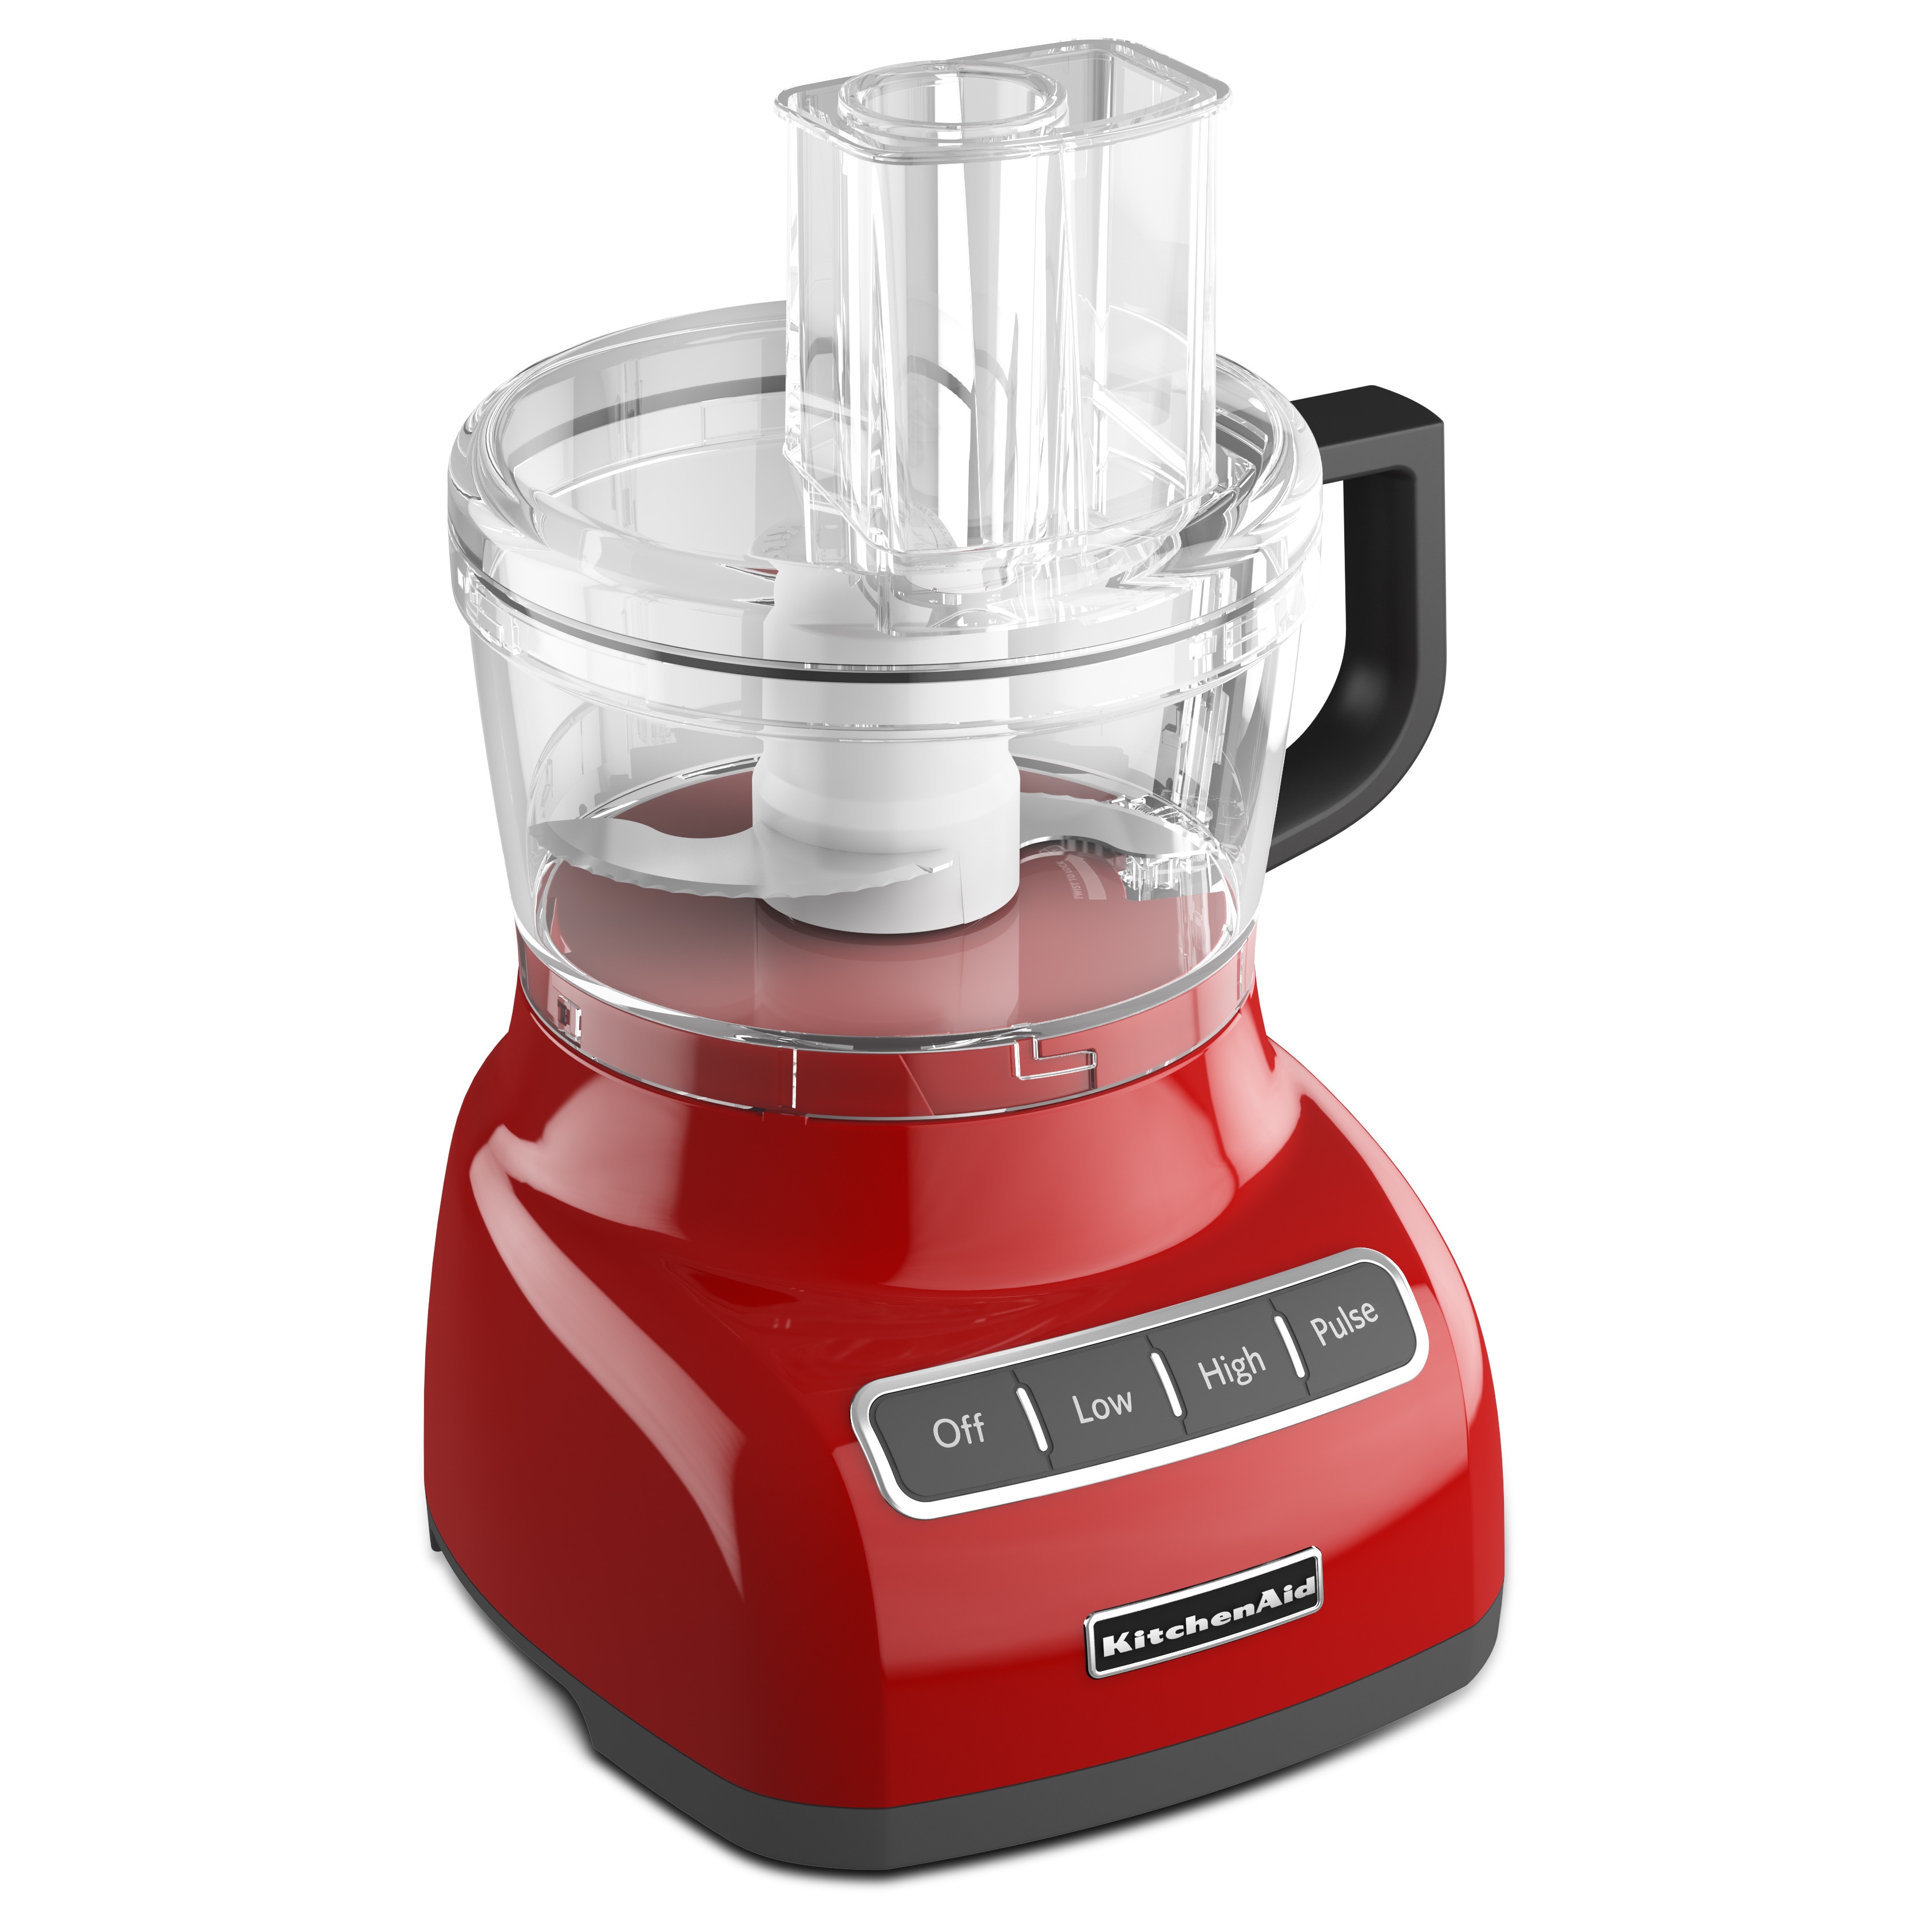 https://ak1.ostkcdn.com/images/products/8590959/KitchenAid-KFP0711ER-Empire-Red-7-cup-Food-Processor-L15862457.jpg